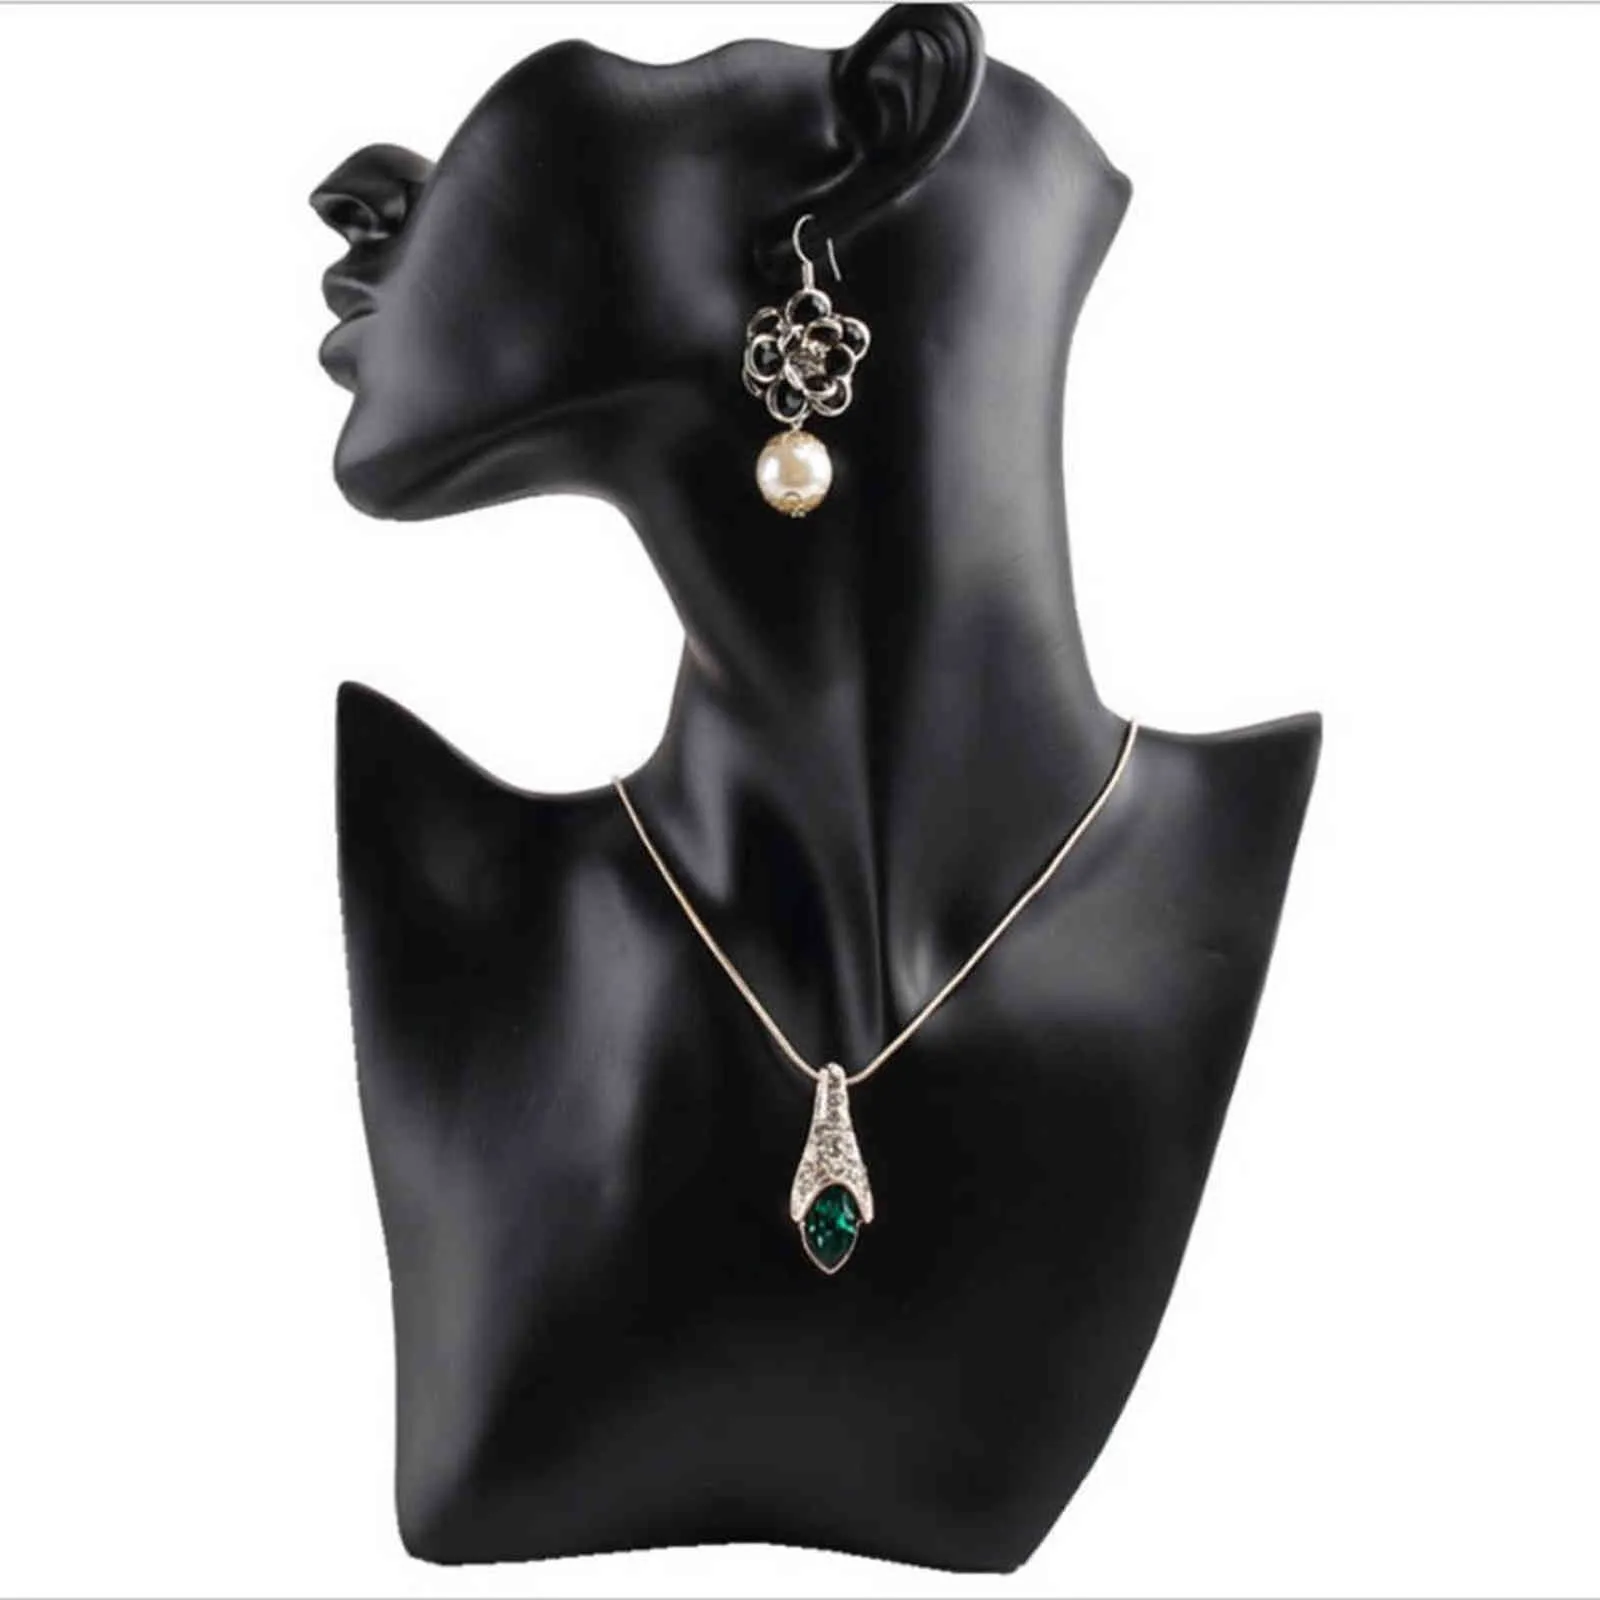 Black Resin Material Elegant Female Mannequin for Fashion Necklace Pendant Bust Jewelry Display Holder Jewelry Store Display 21111183w